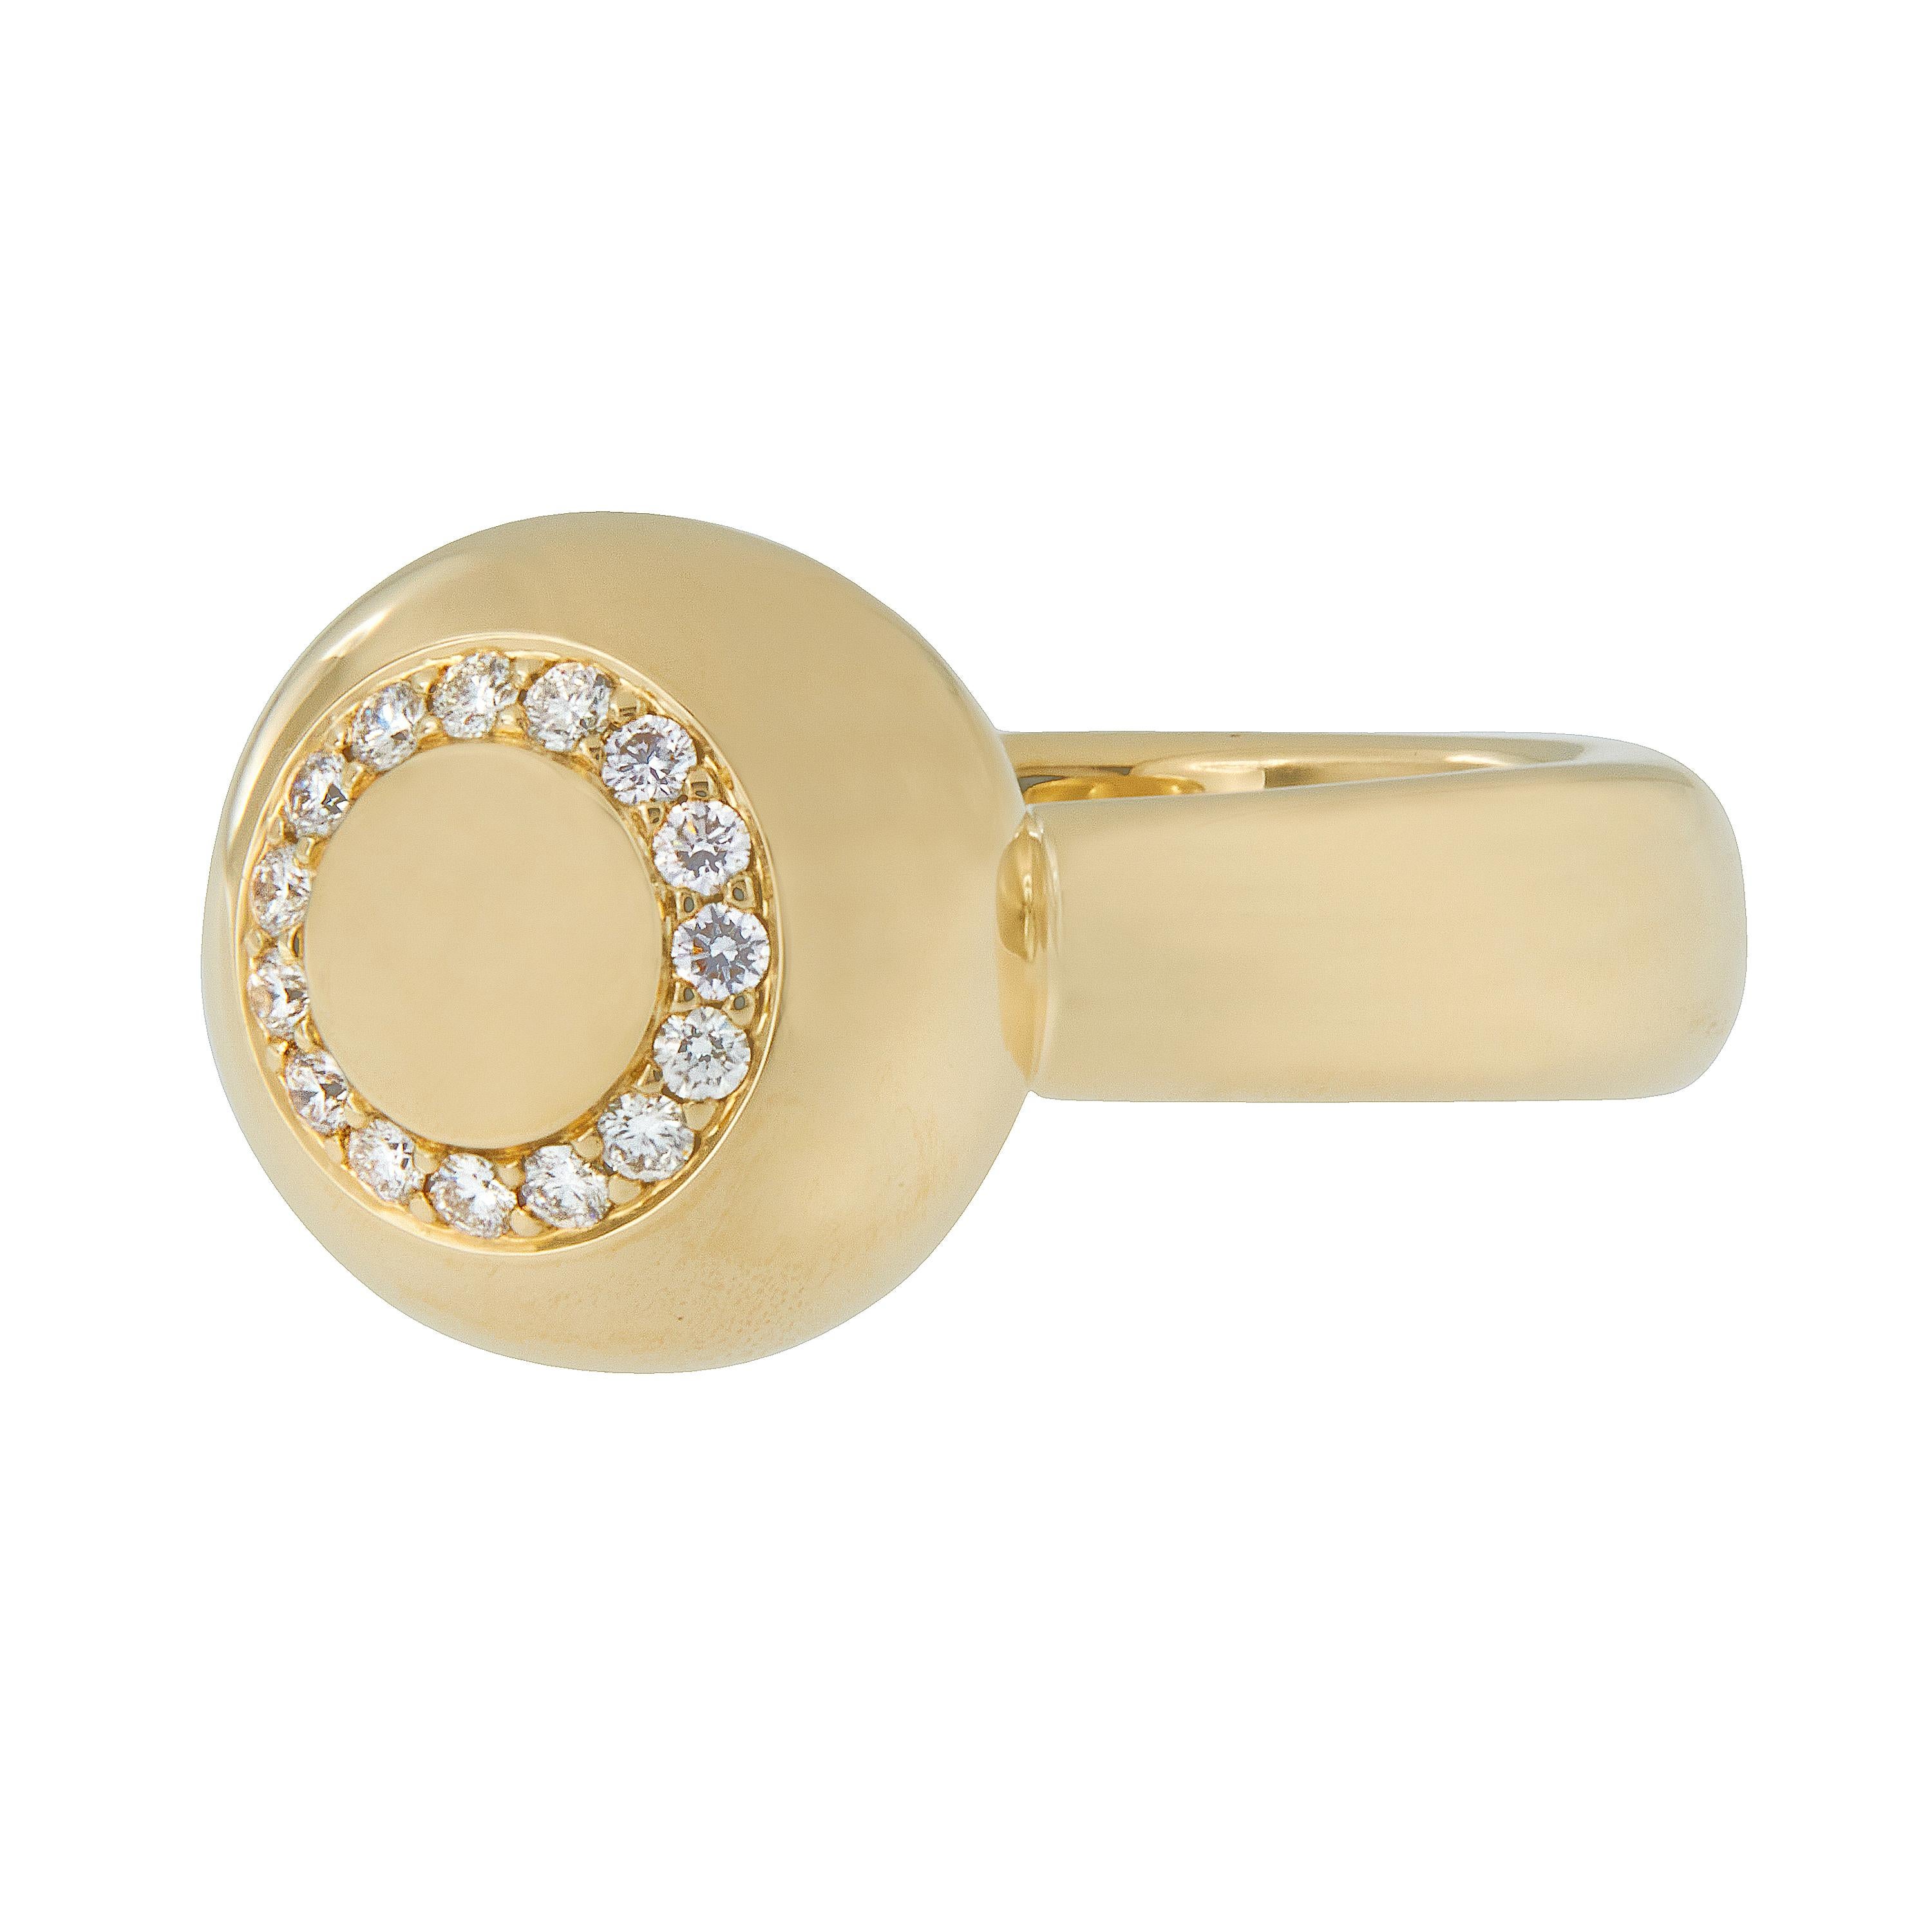 Since 1976, optimal quality and up-to-date design have always been the principles behind Scheffel-Schmuck. The clean, rounded look of this ring from their Bubbles Collection is truly eye catching! 18 Karat yellow gold rounded ring accented by 0.20